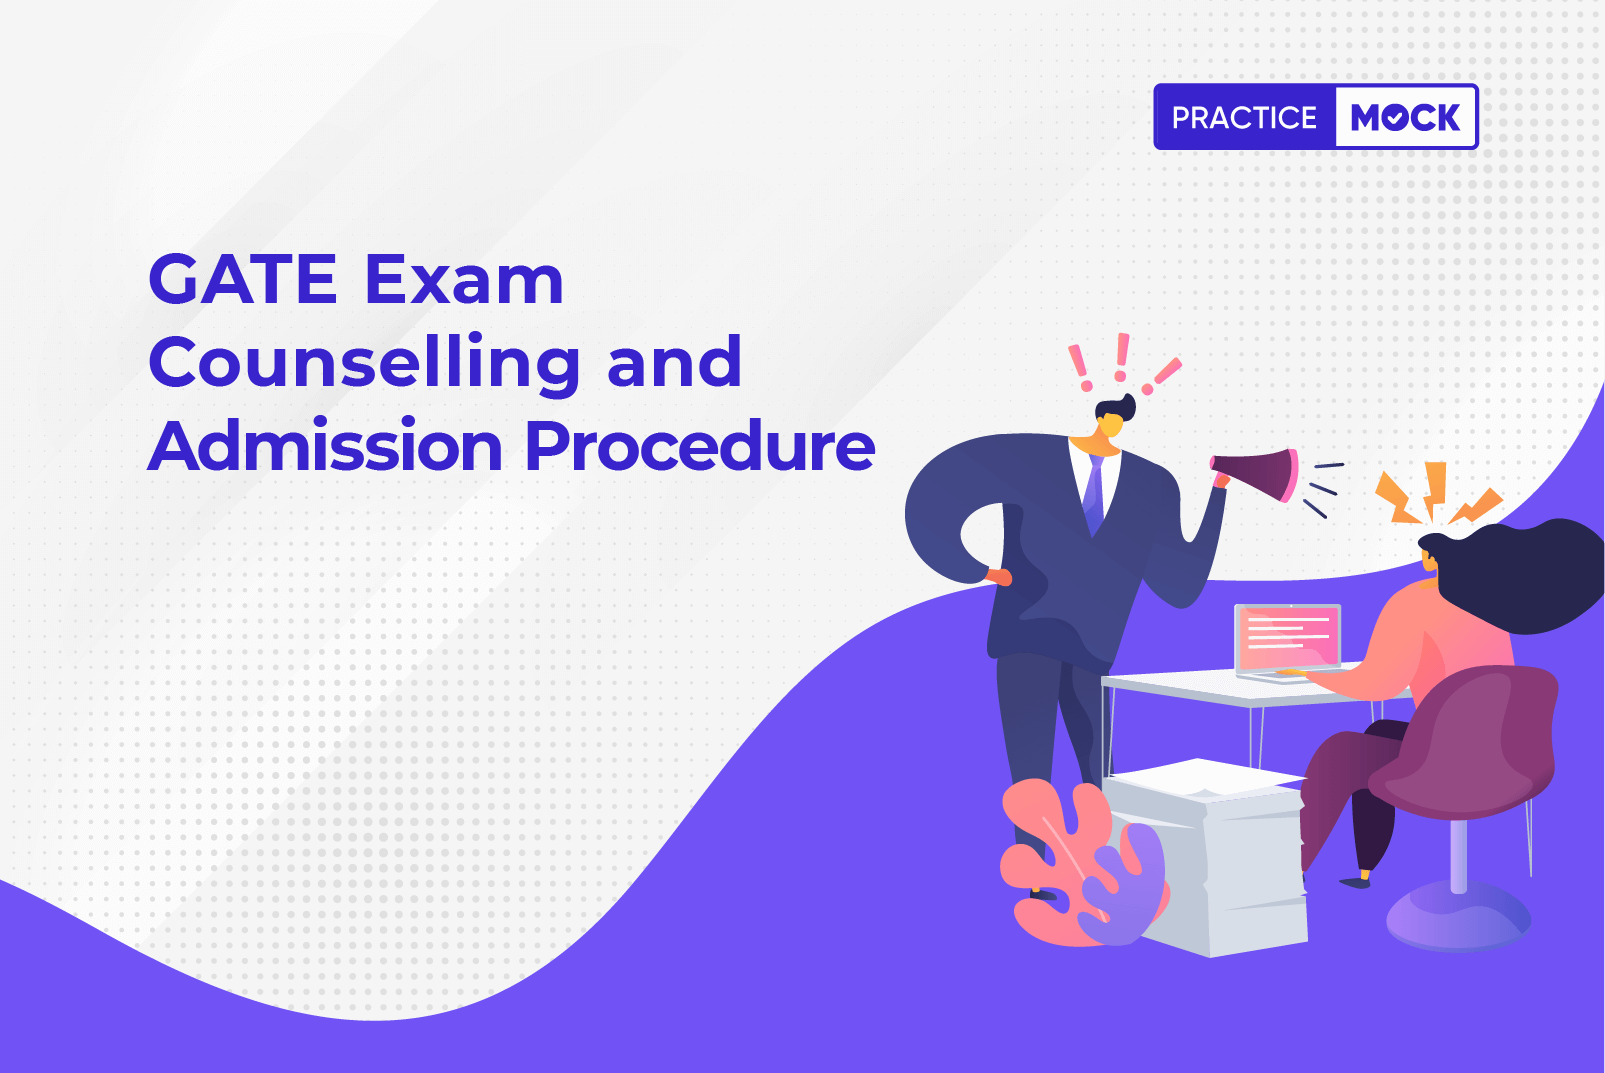 FI_GATE_Counselling_Admission_Procedure_170423